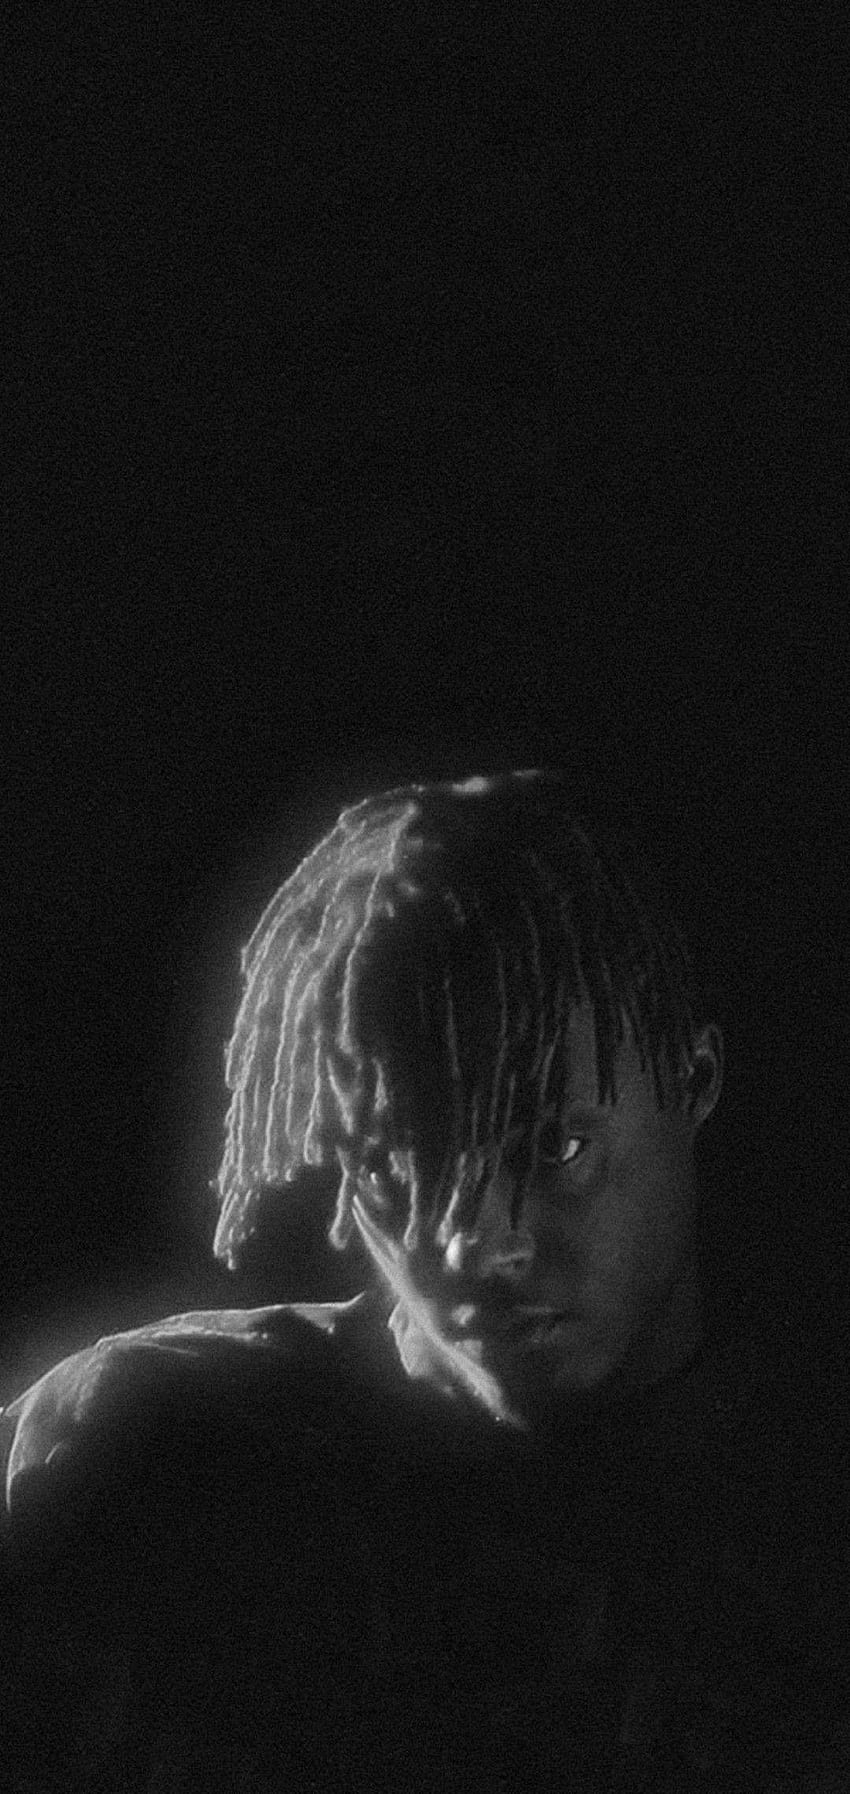 Black And White Photo Of Juice Wrld Holding Hair With Hand Wearing Coat  Suit HD Juice Wrld Wallpapers  HD Wallpapers  ID 48811